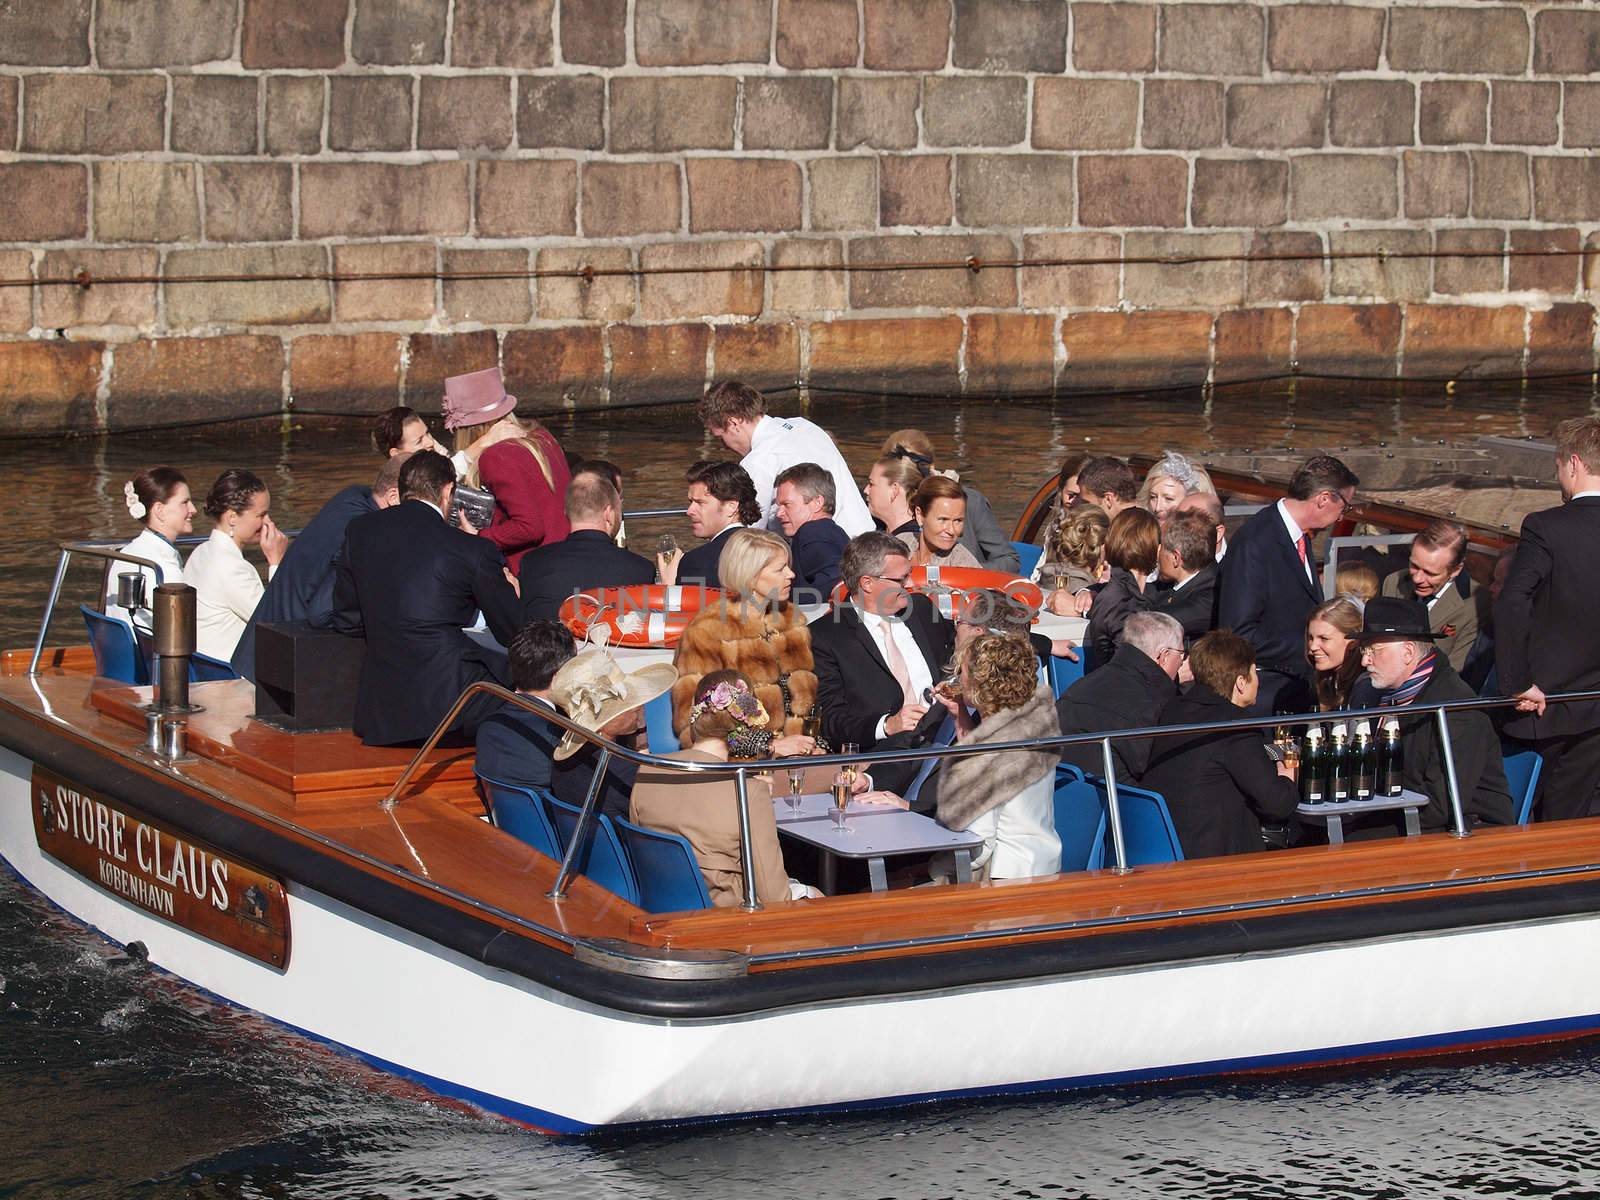 COPENHAGEN - APR 14: Unknown European Royal guests and friends on boat, on the way to reception after the christening of Prince Vincent and Princess Josephine on April 14, 2011 in Copenhagen, Denmark.
